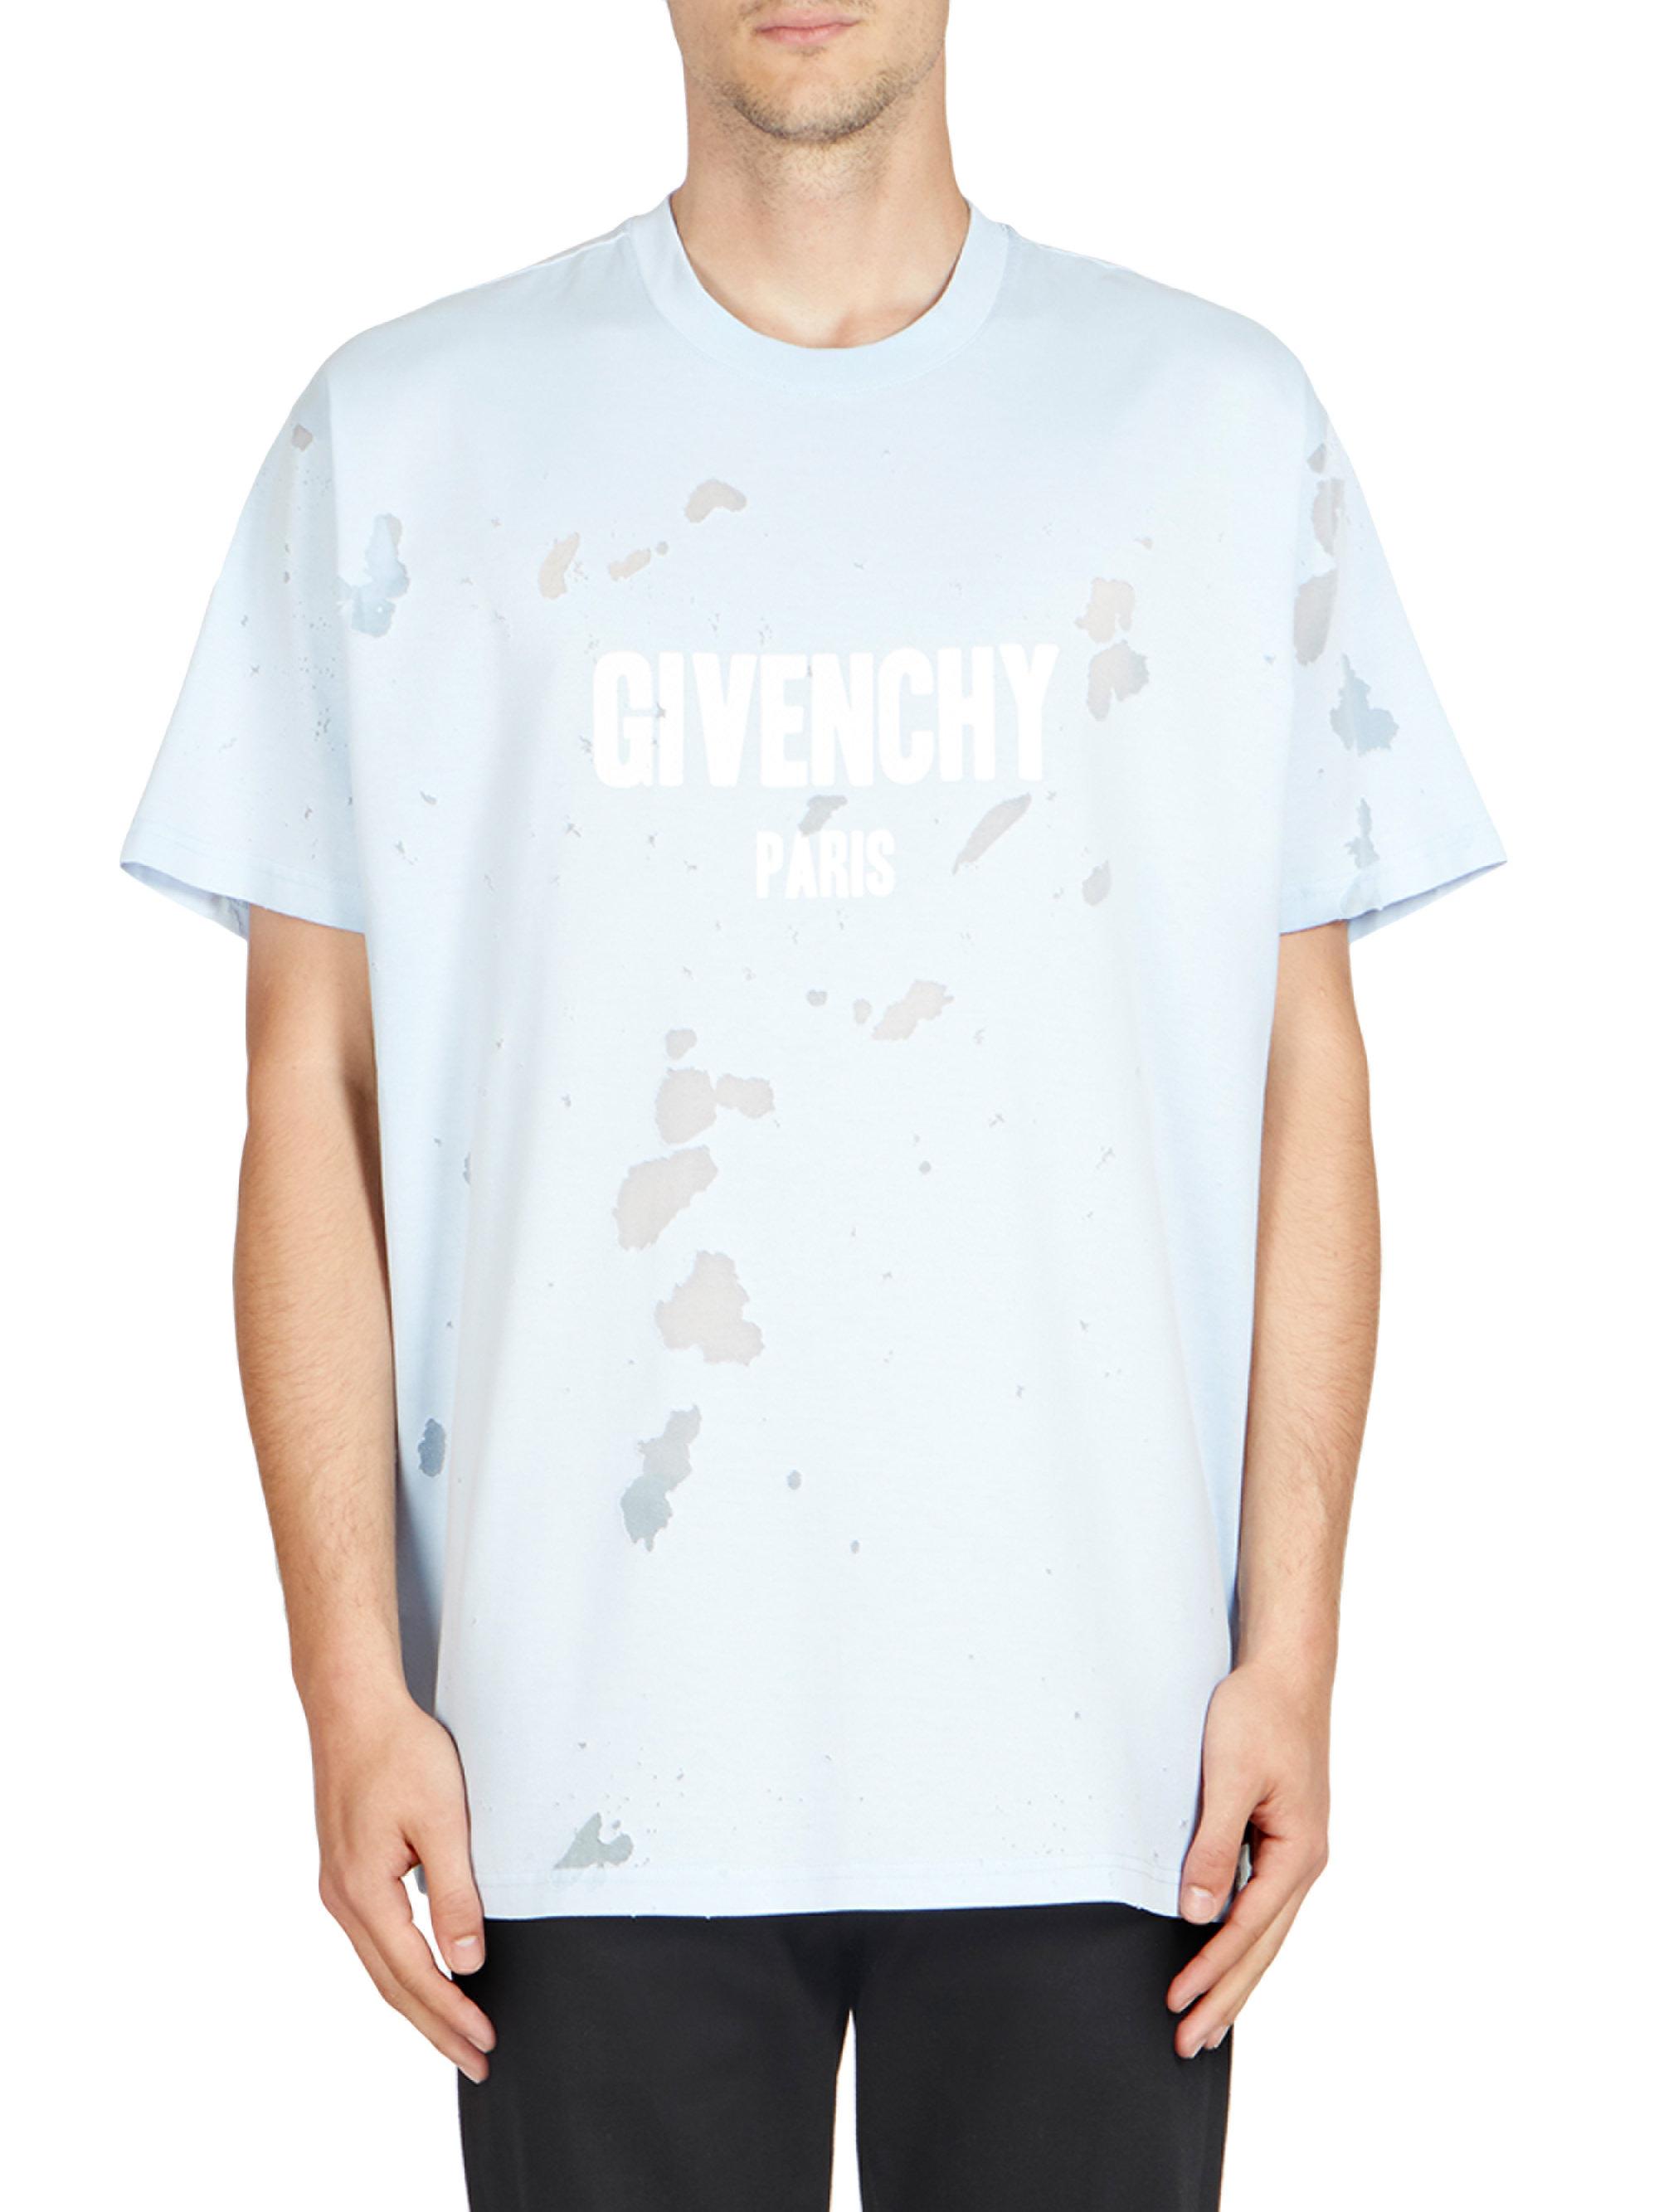 givenchy blue tee